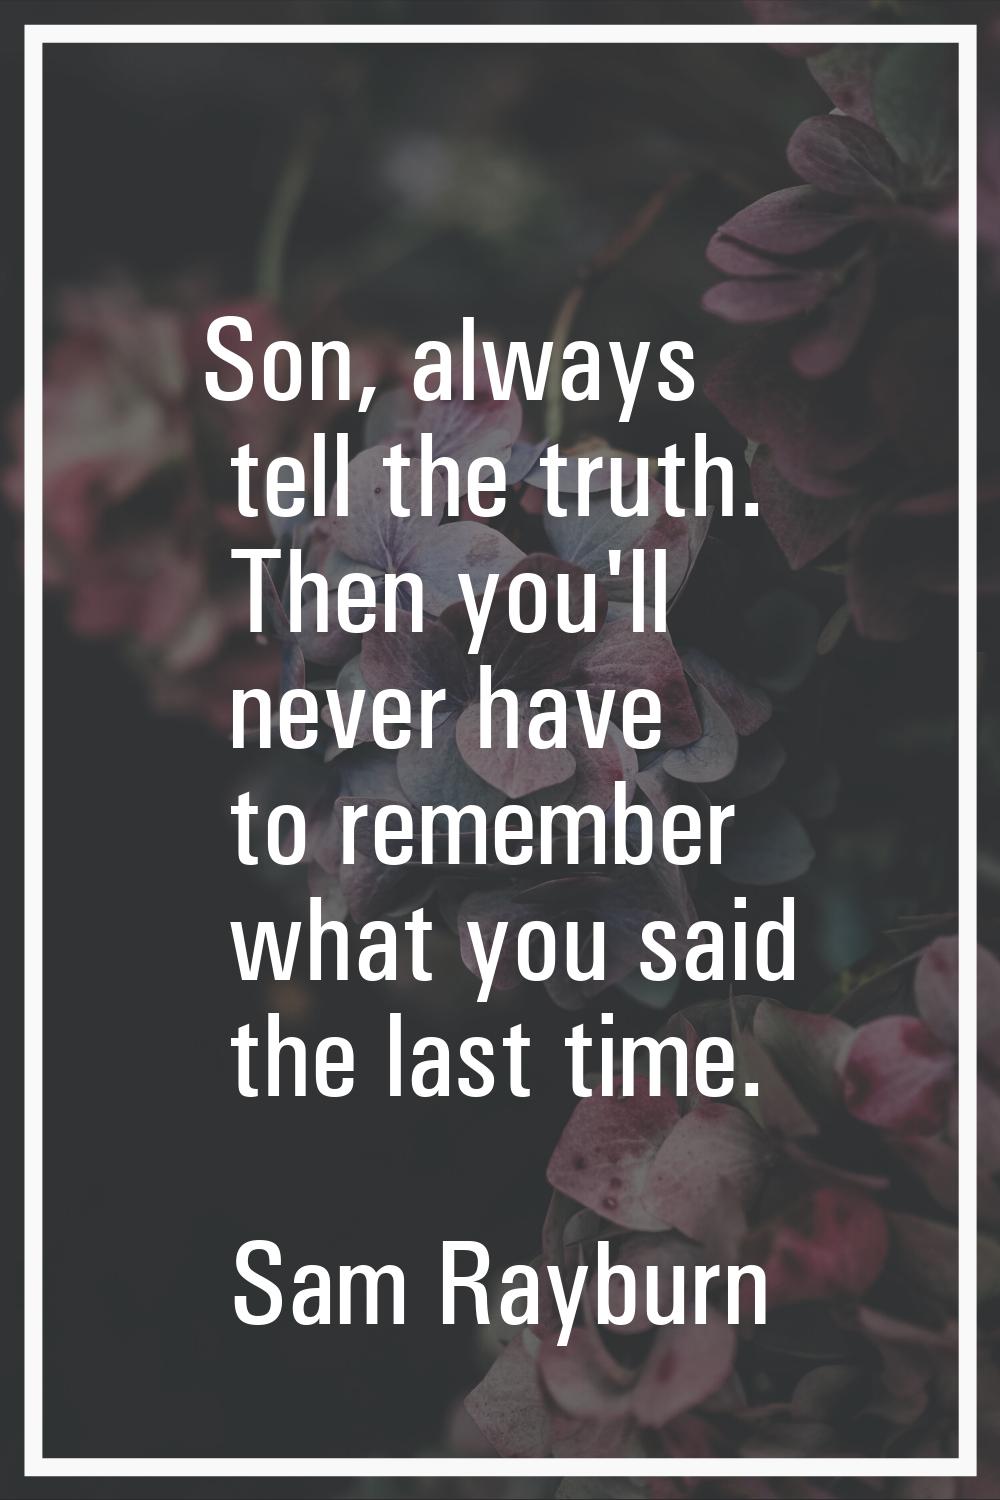 Son, always tell the truth. Then you'll never have to remember what you said the last time.